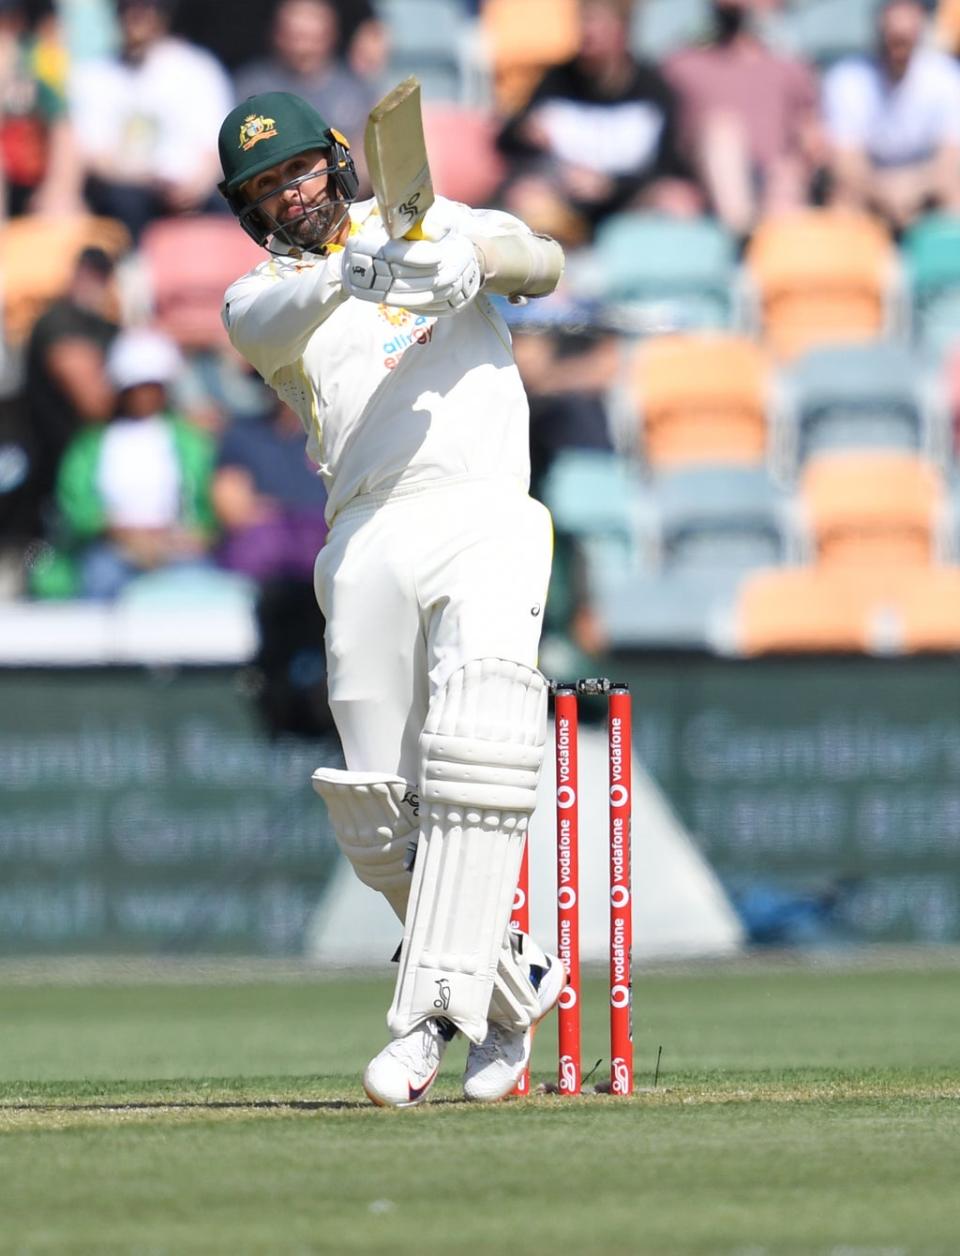 Nathan Lyon hit Wood for three sixes in the space of four balls (Darren England via AAP/ PA) (PA Media)